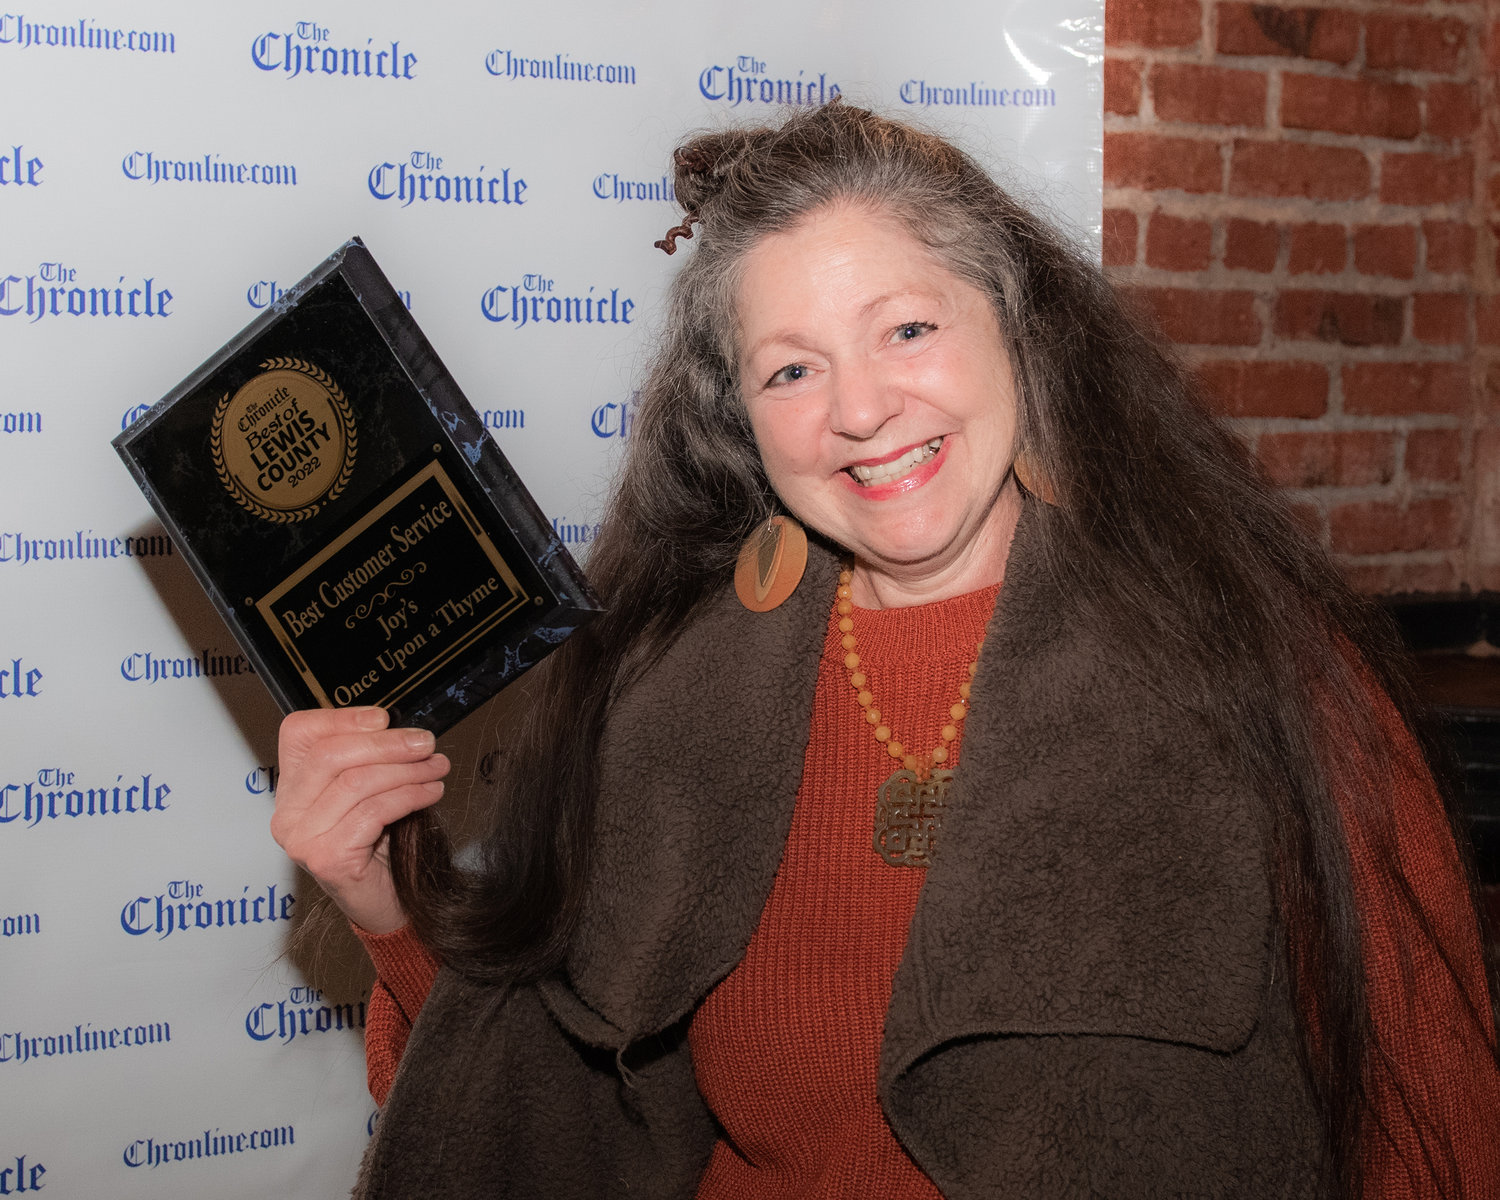 Joy’s Once Upon a Thyme won “Best Catering, Best Customer Service and Best Place to Work” during the 2022 Best of Lewis County event hosted by The Chronicle at The Juice Box Thursday evening in Centralia.